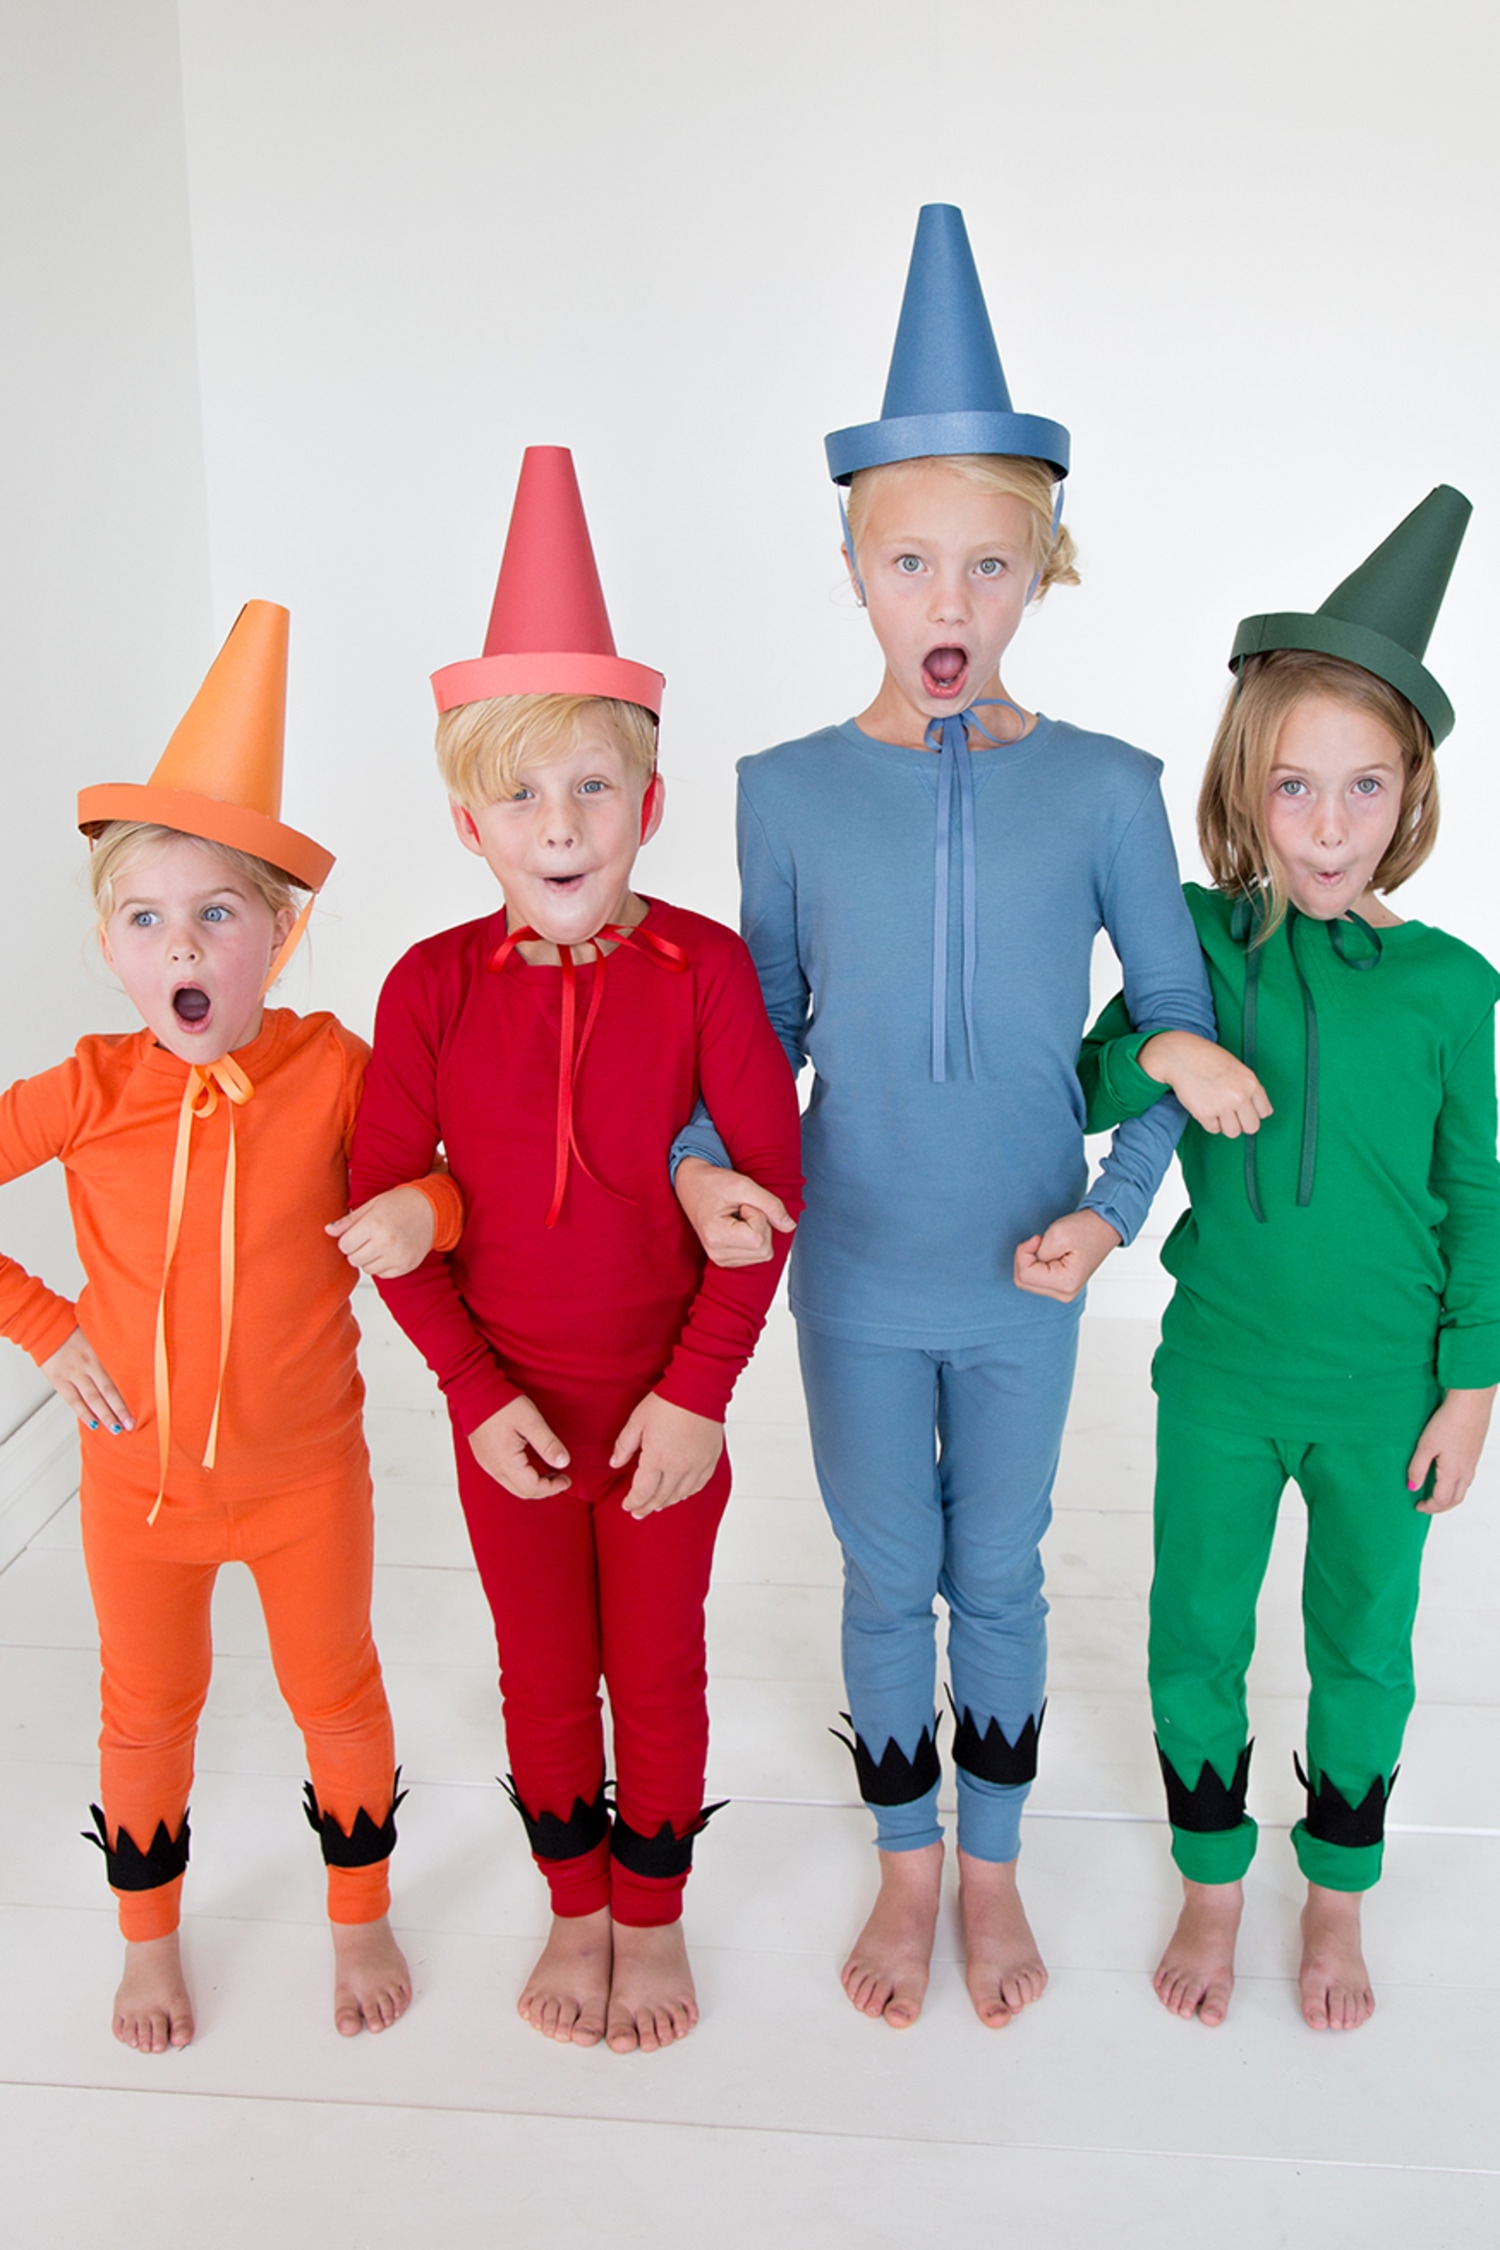 Kangaroo health Competitive 28 Best Family Halloween Costume Ideas - Easy DIY Family Costumes